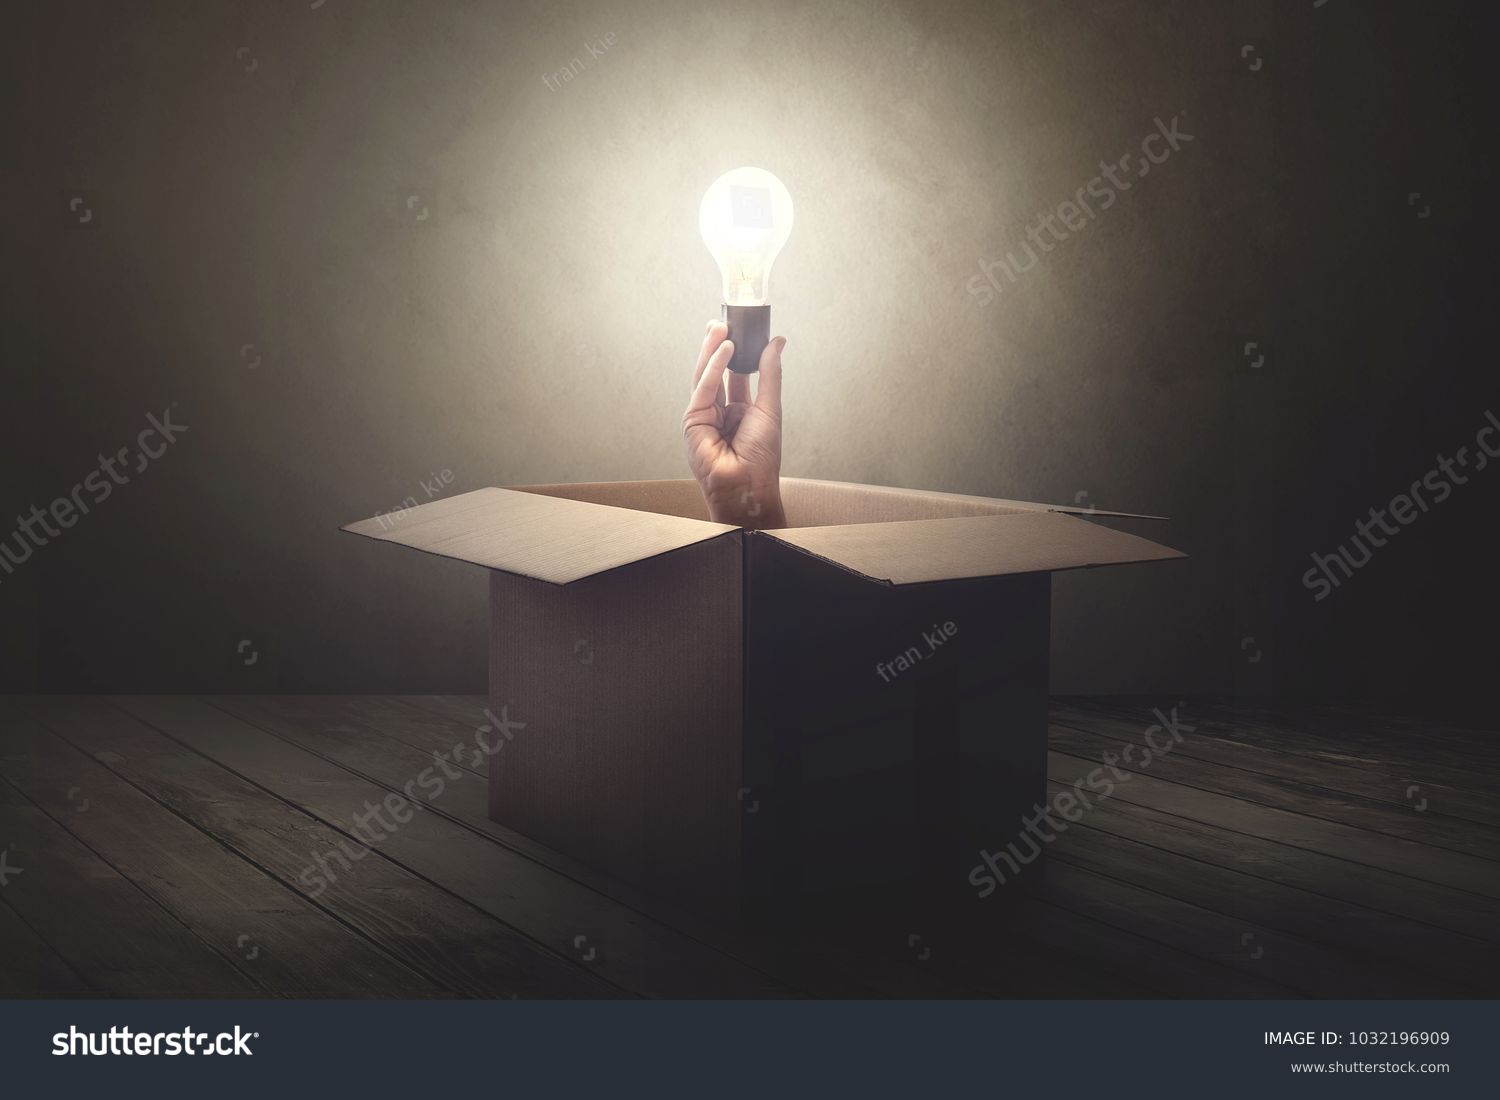 hand holding light bulb coming out from a paper box #1032196909